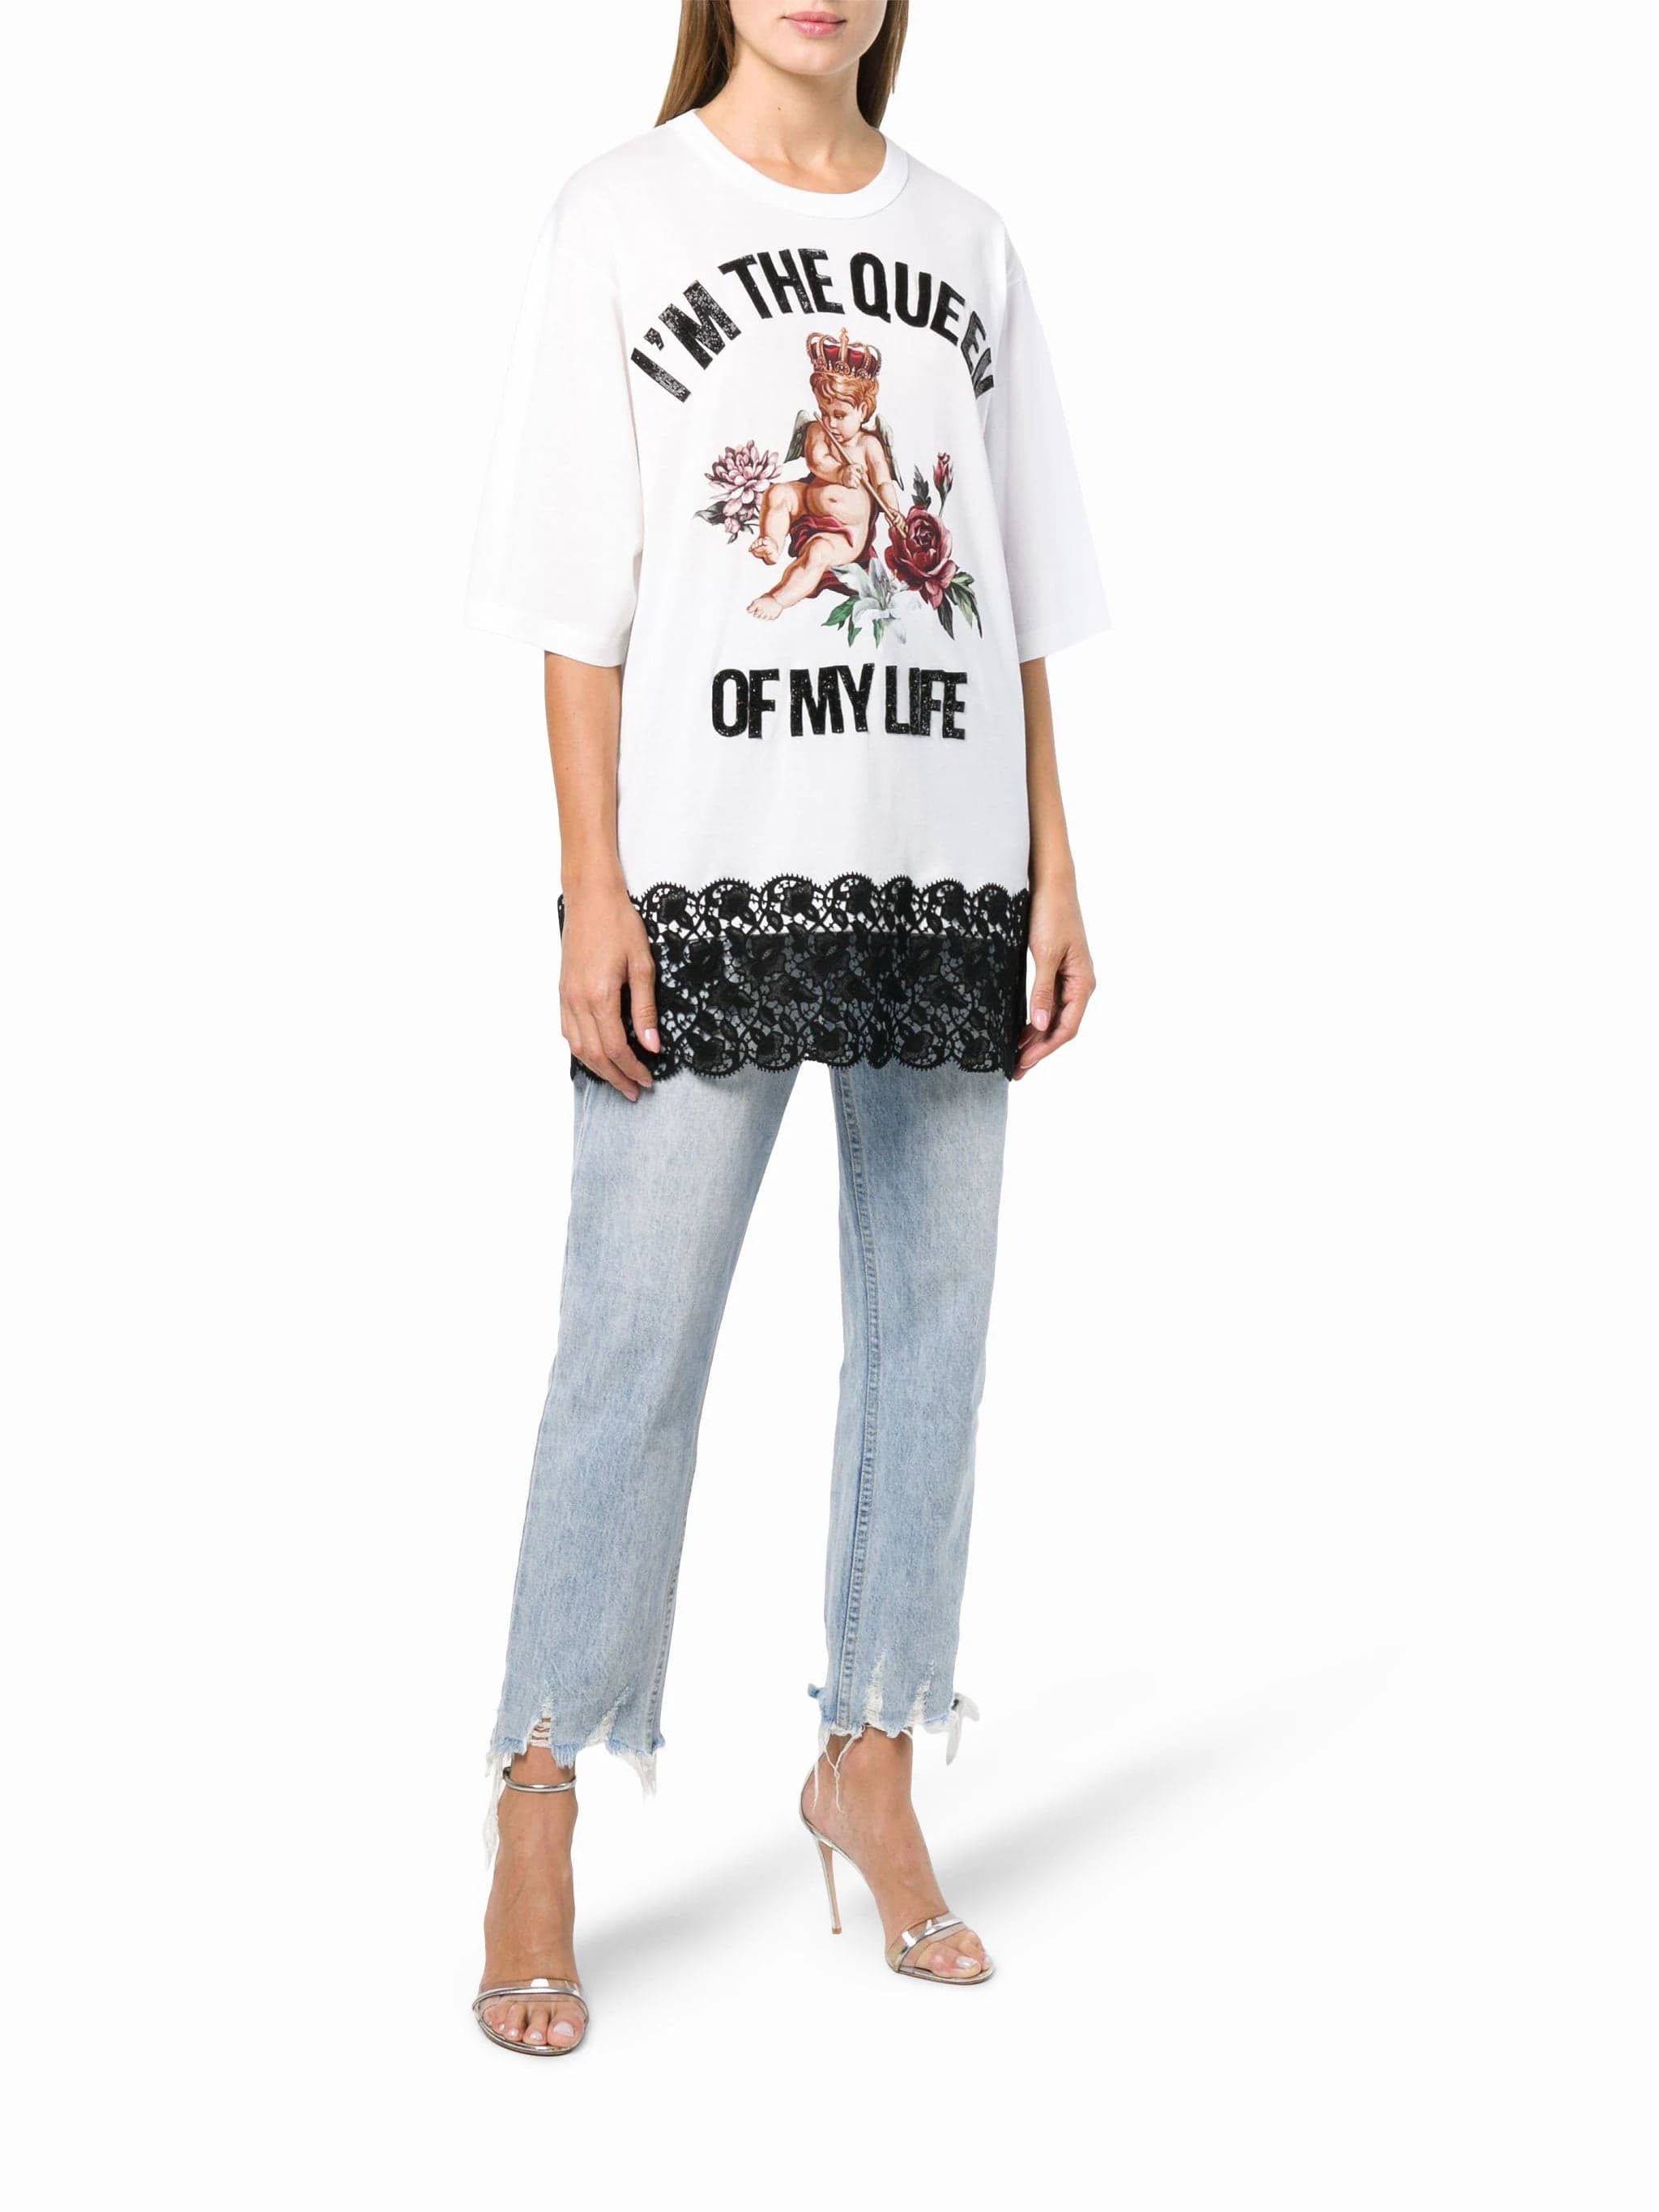 Dolce & Gabbana 'I'm The Queen Of My Life' T-Shirt